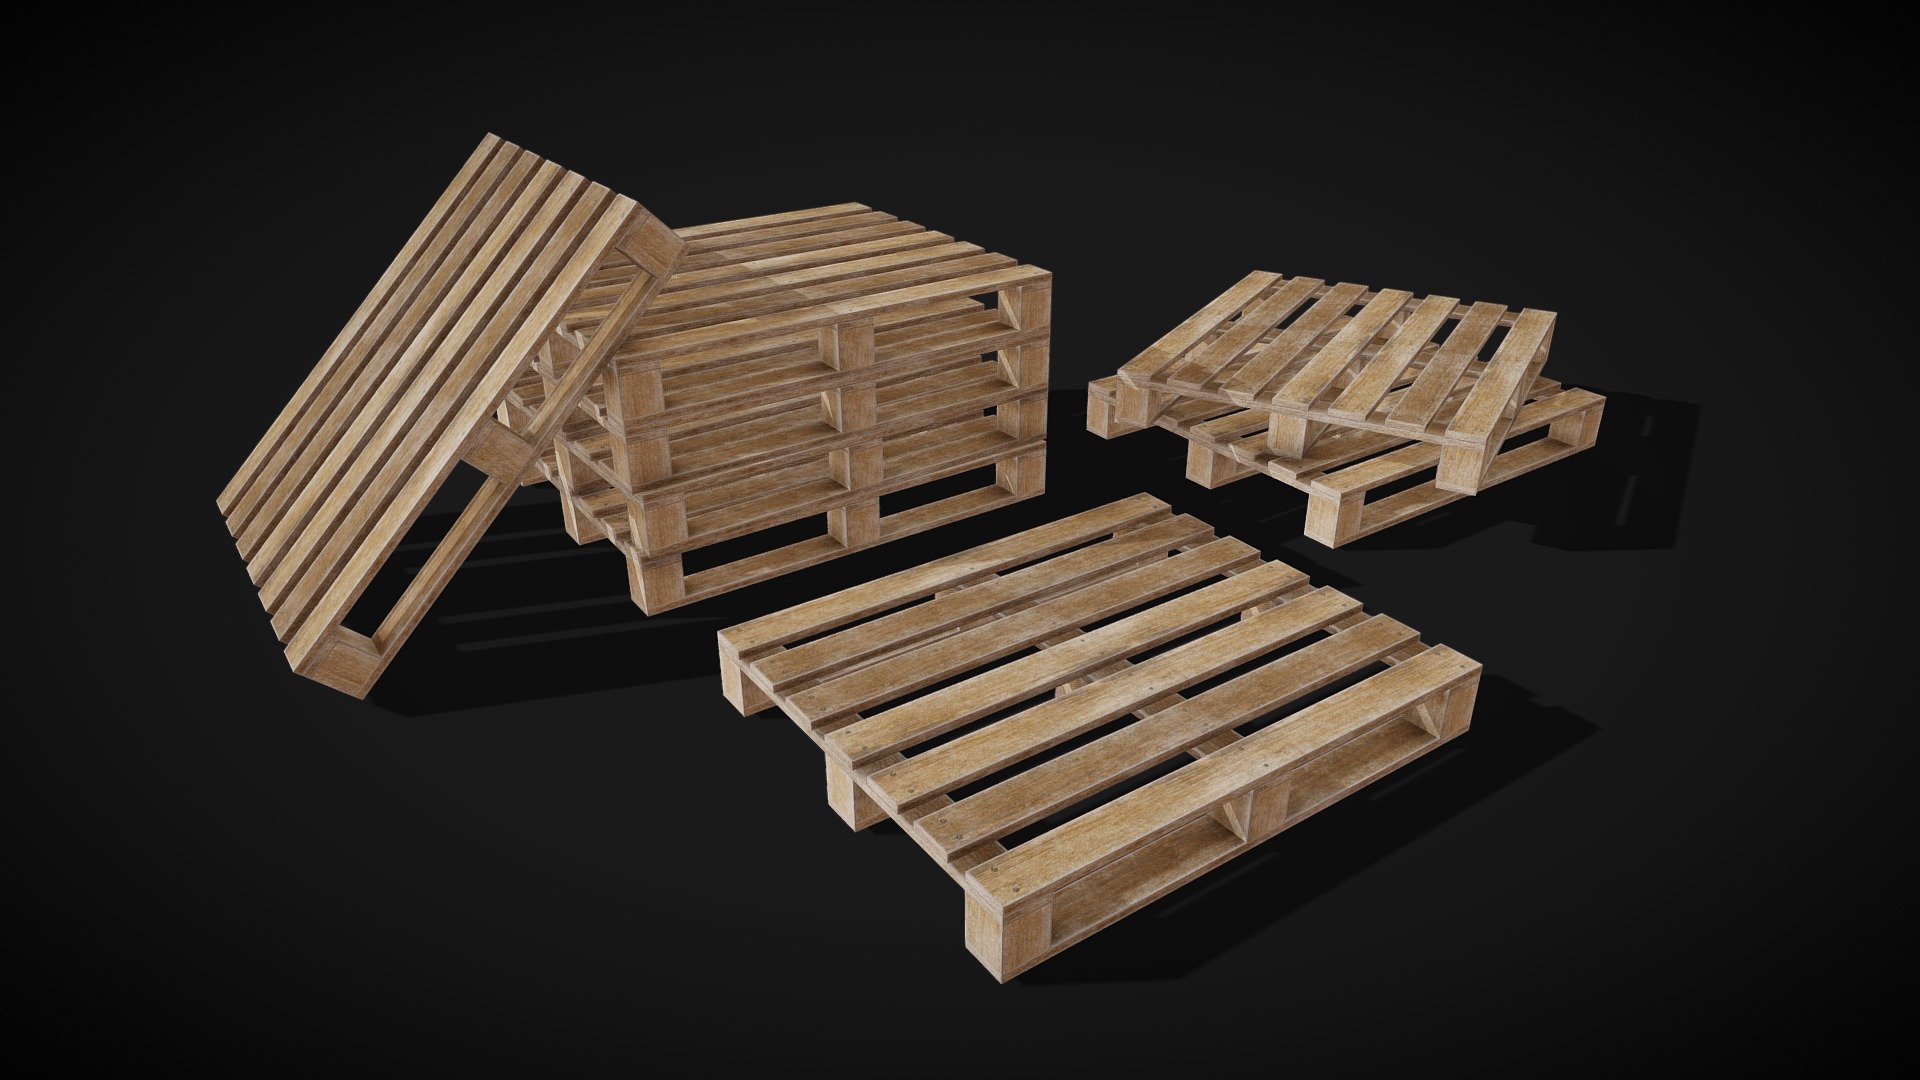 Low Poly Pallet: 228 tris

Types of textures: Base Color, Metallic, Roughness, Normal

Quality: 2048x2048

Format: PNG - Low Poly | Pallets - Download Free 3D model by Den1121 3d model